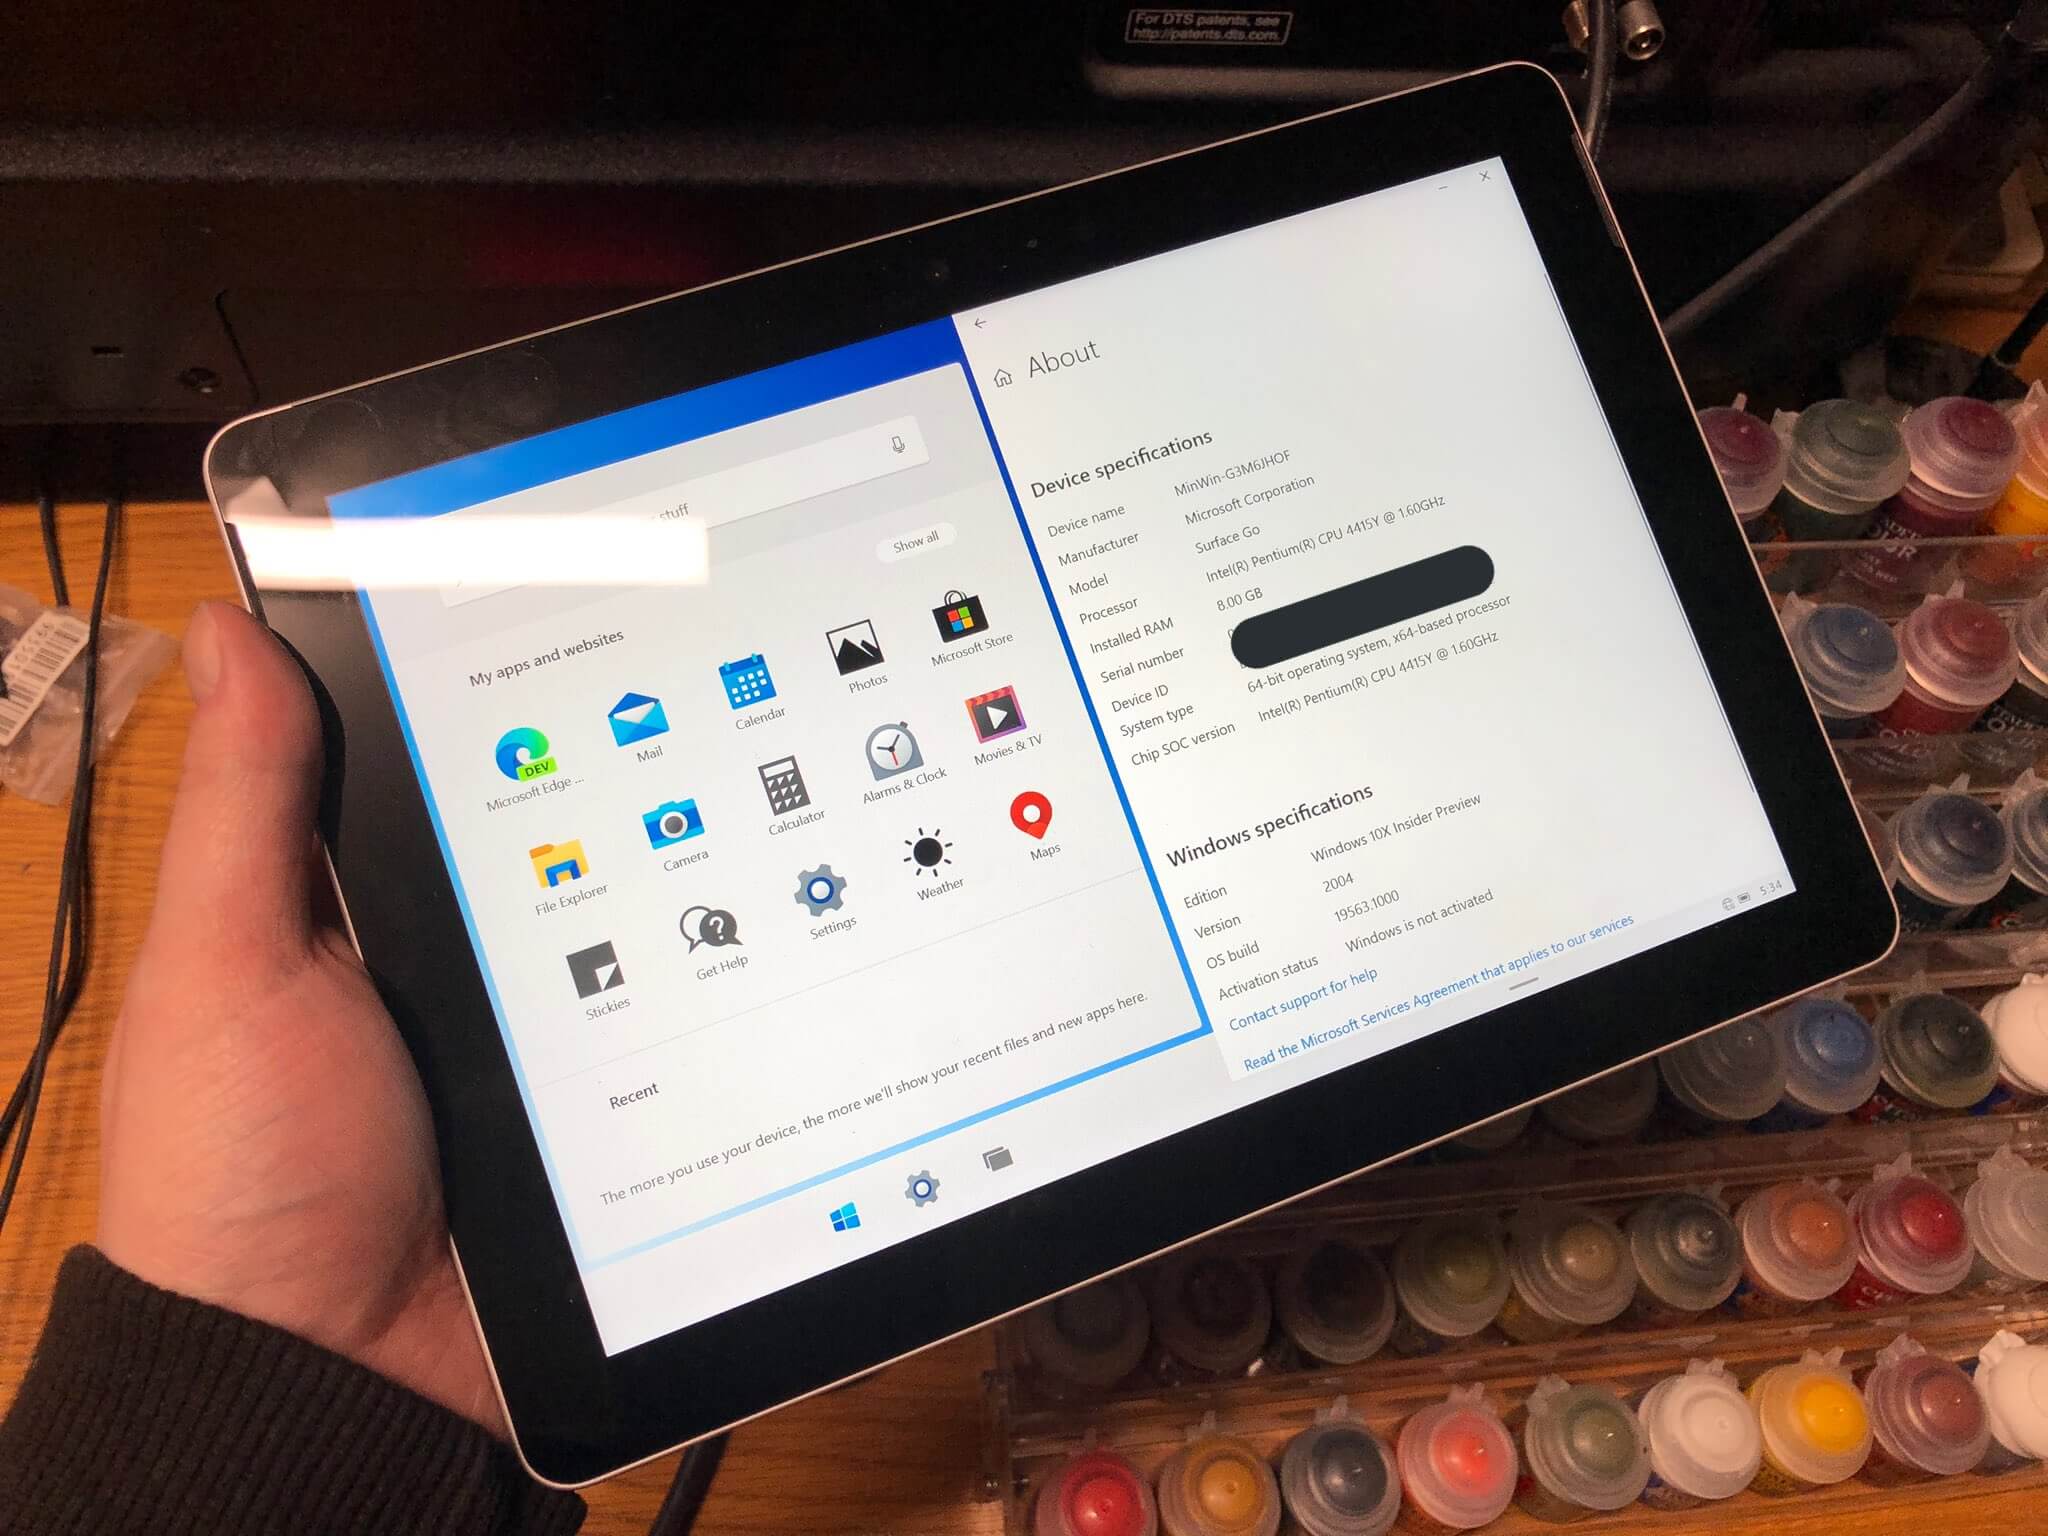 Someone installed Windows 10X on a Surface Go and a MacBook